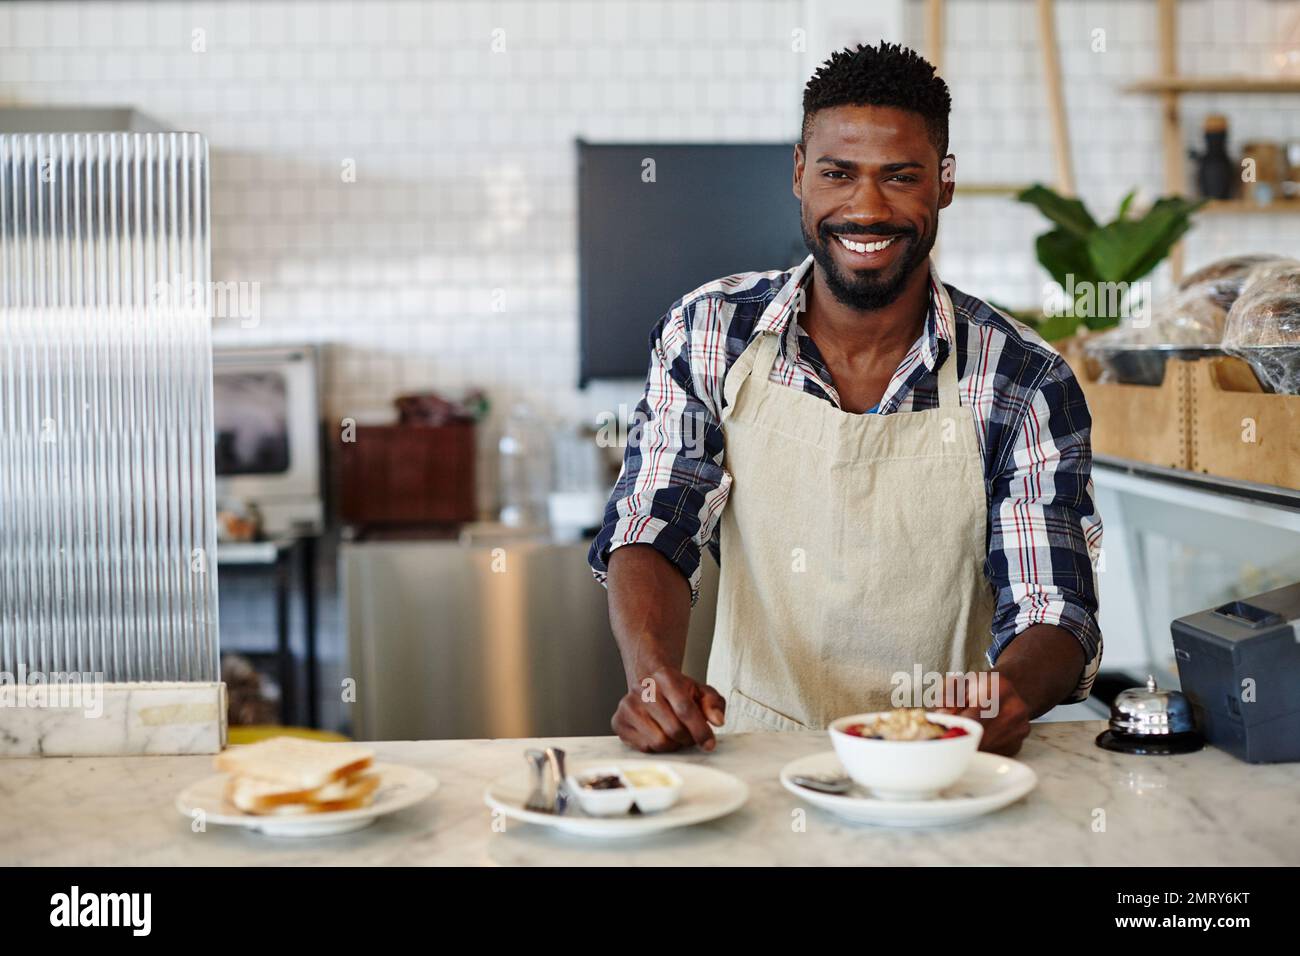 We serve delicious, healthy breakfasts. Cropped portrait of a handsome young man working in a cafe. Stock Photo